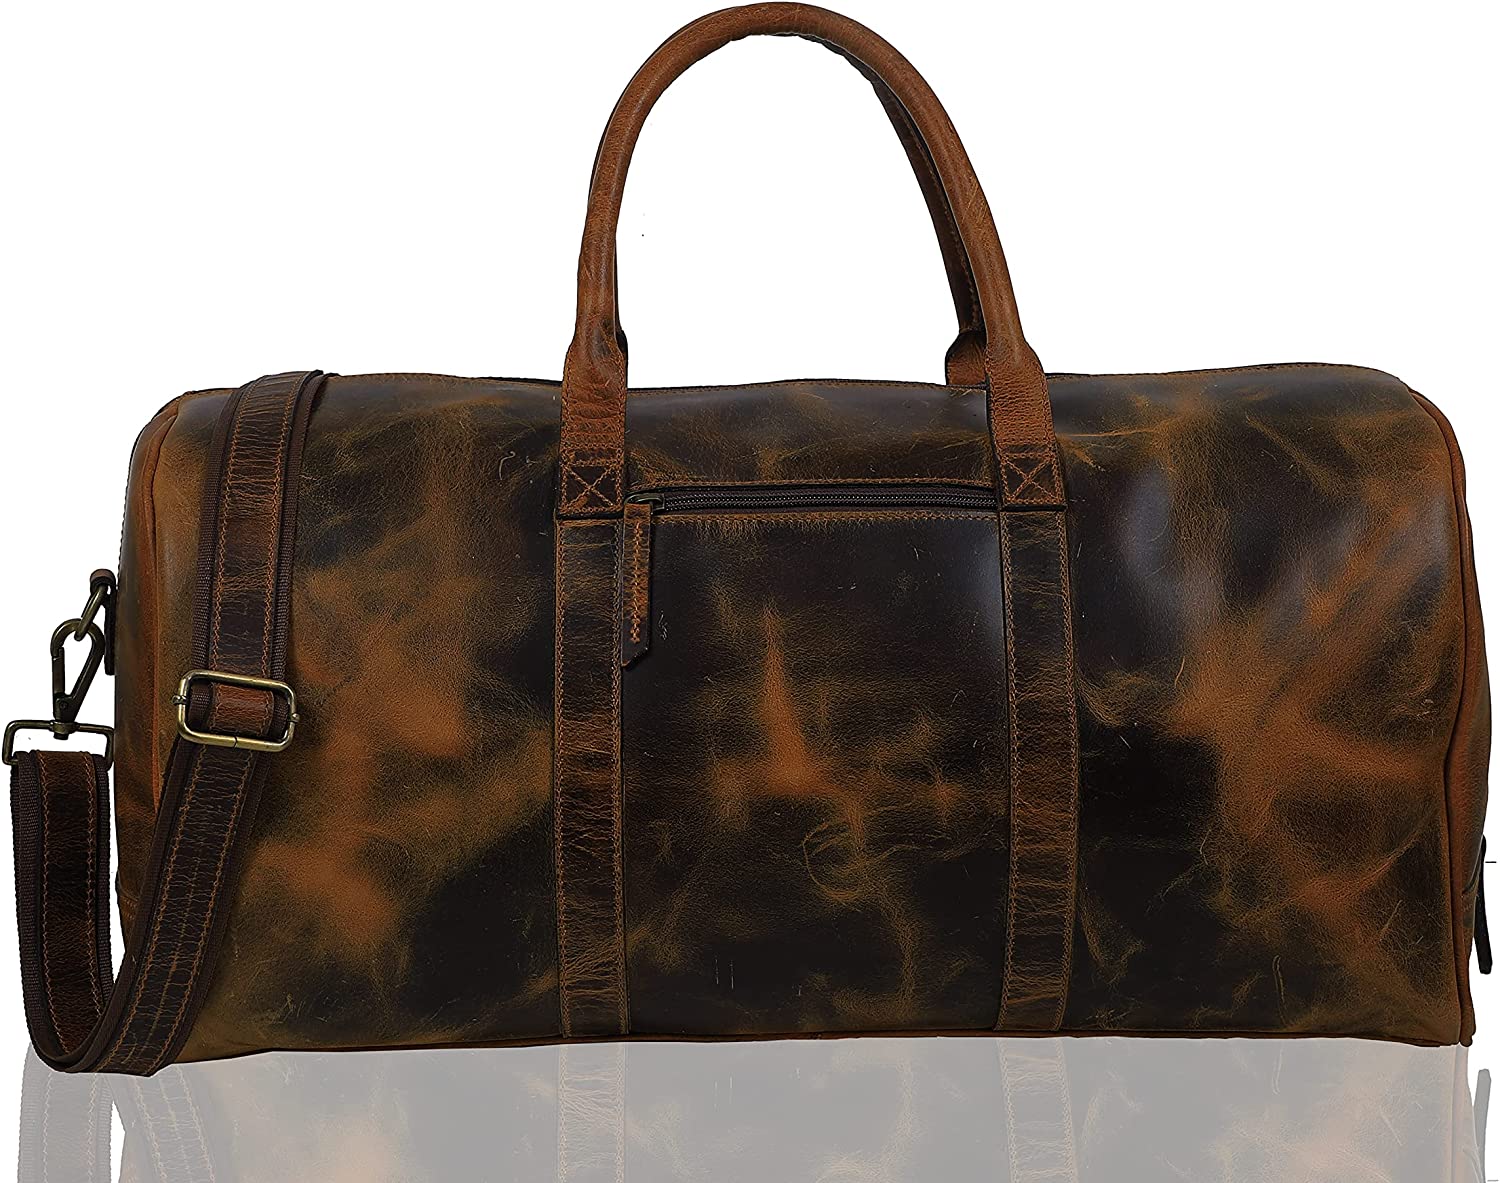 Brown leather duffle bag